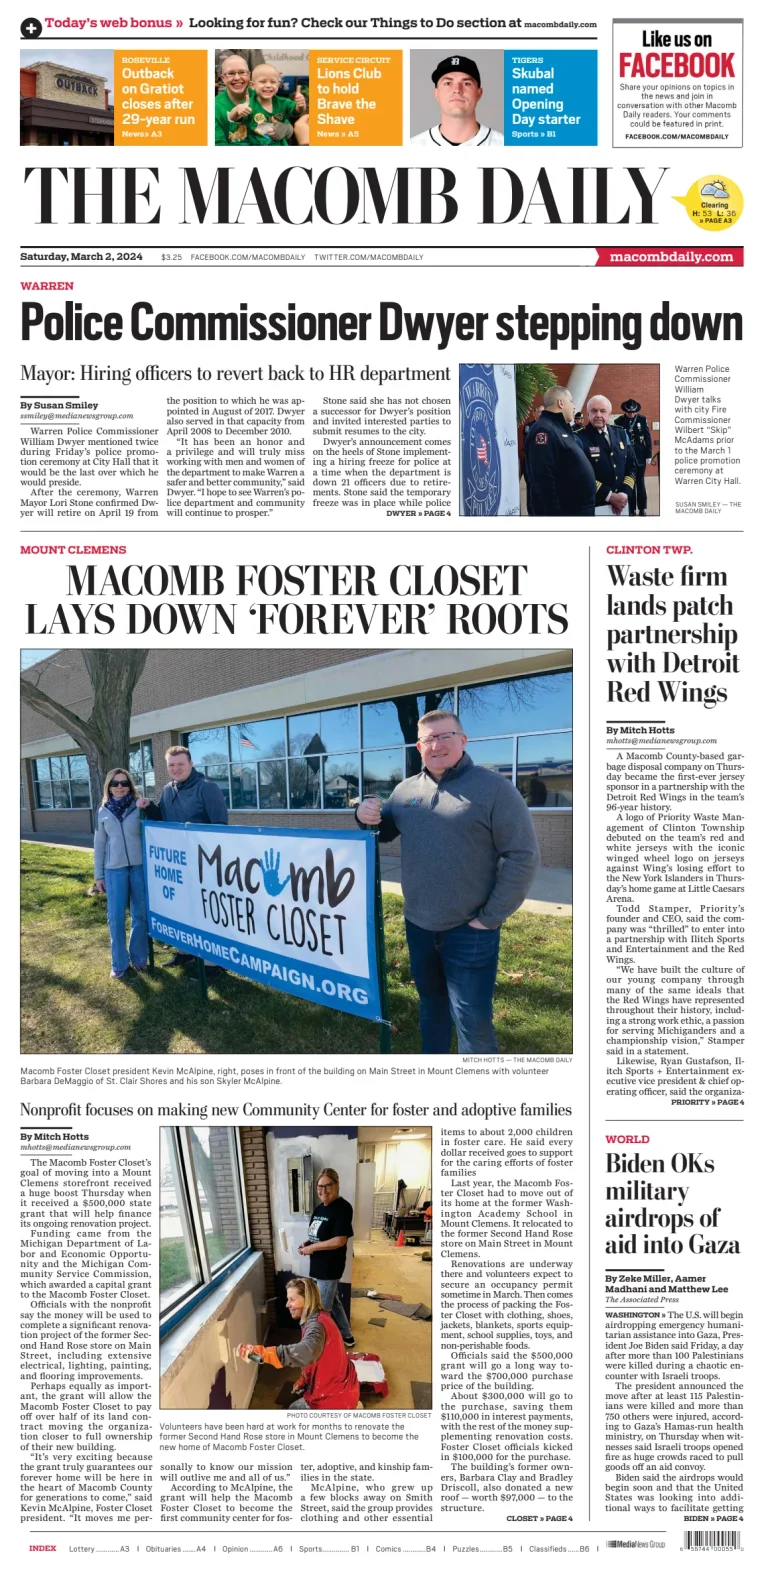 The Macomb Daily